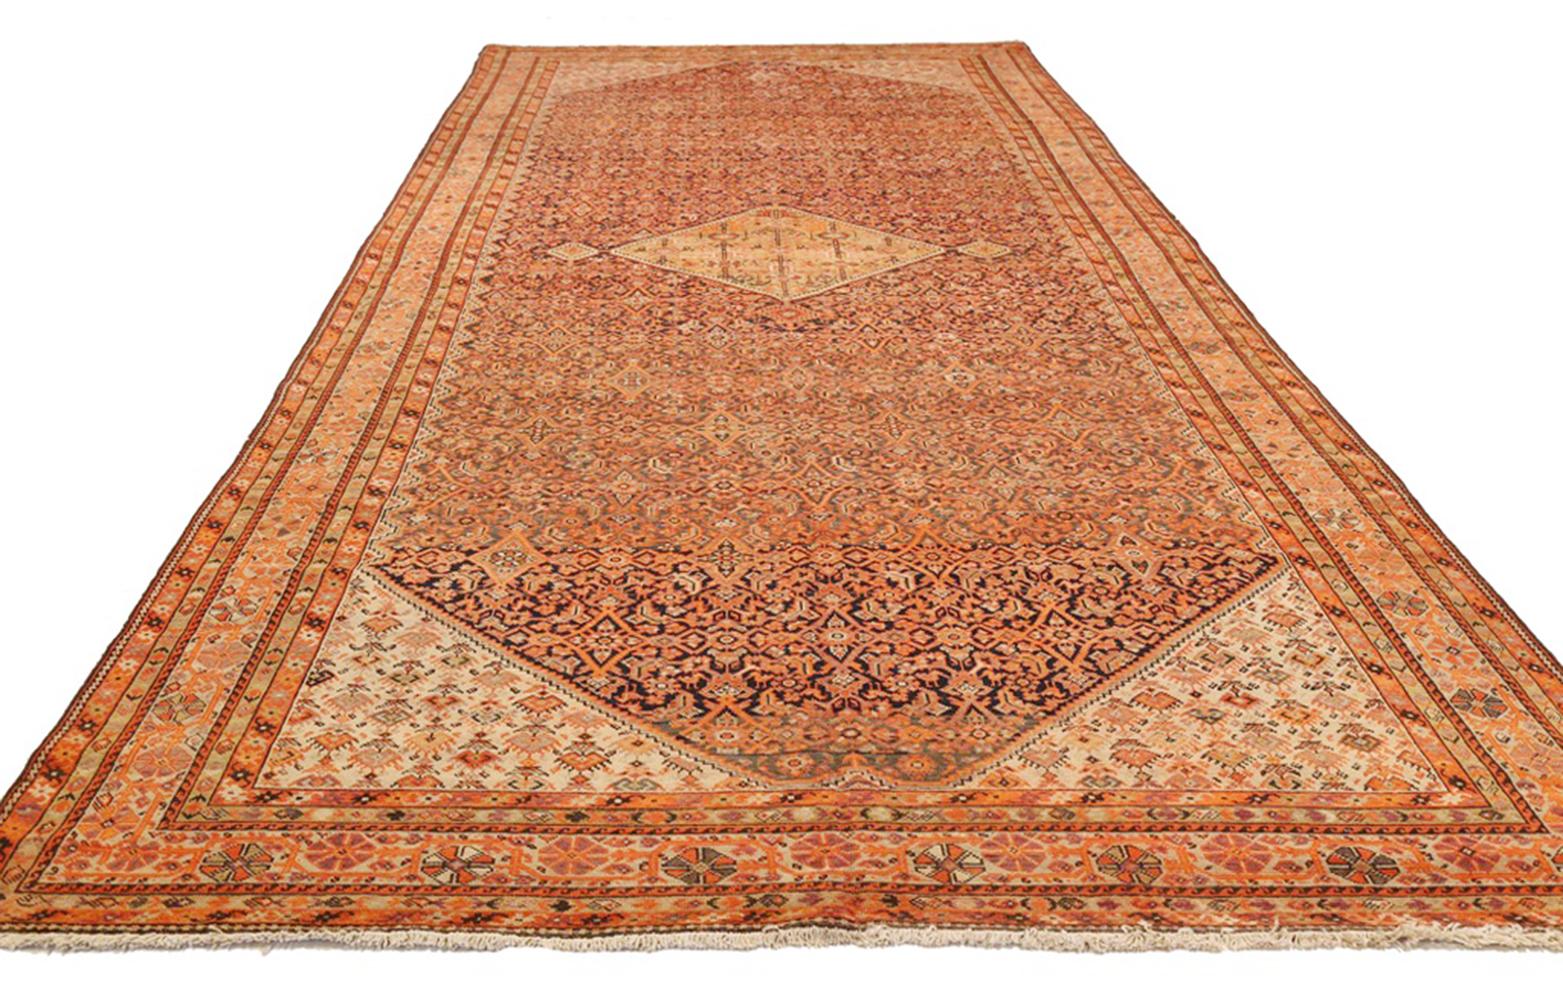 Antique Persian runner rug handwoven from the finest sheep’s wool and colored with all-natural vegetable dyes that are safe for humans and pets. It’s a traditional Malayer design featuring red and black all-over flower details. It’s a lovely piece